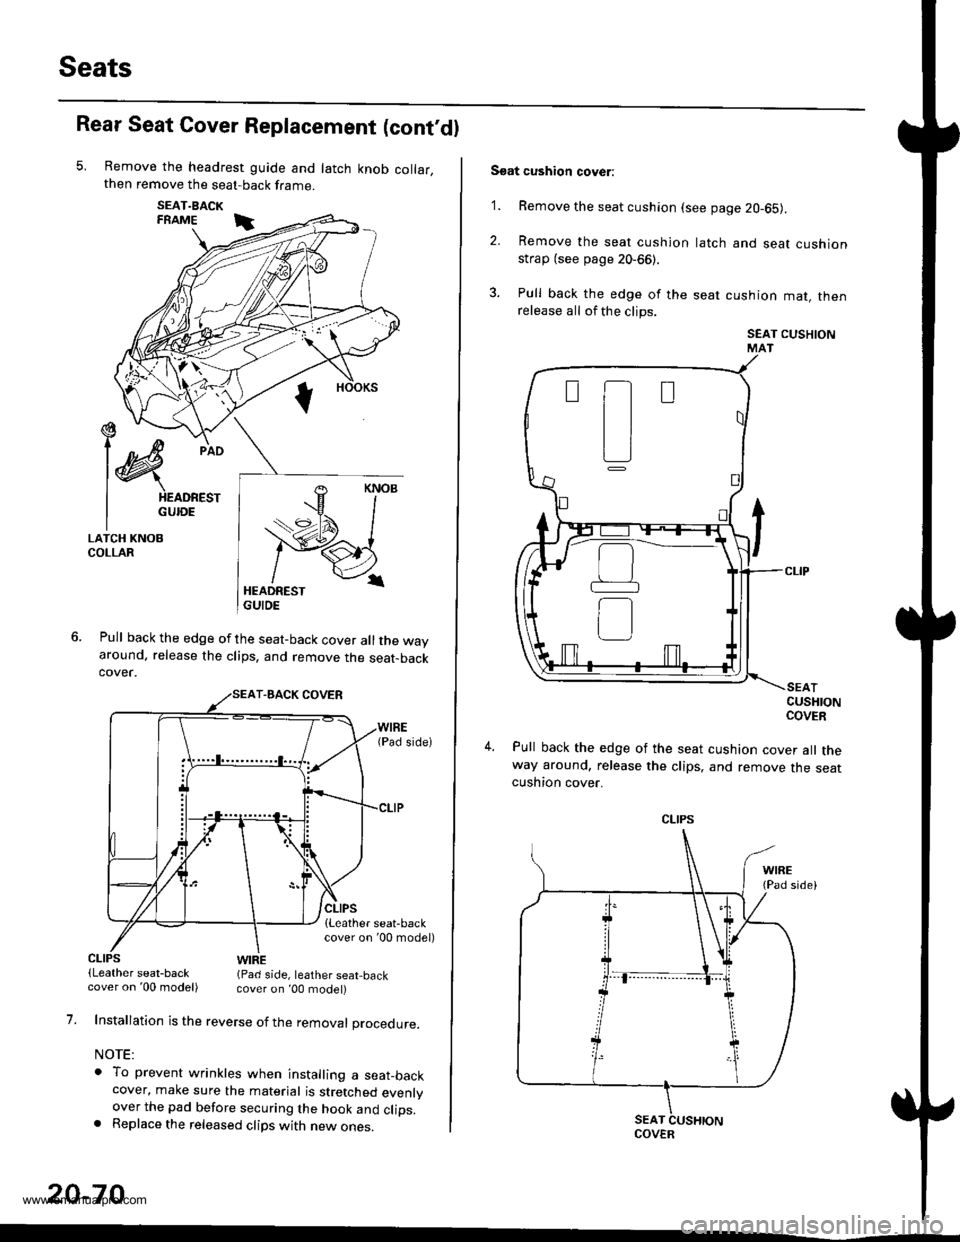 HONDA CR-V 1999 RD1-RD3 / 1.G Workshop Manual 
Seats
Rear Seat Cover Replacement (contdl
Remove the headrest guide and latch knob collar,then remove the seat-back frame.
SEAT.BACKFRAME i
Pull back the edge of the seat-back cover all the wayaroun